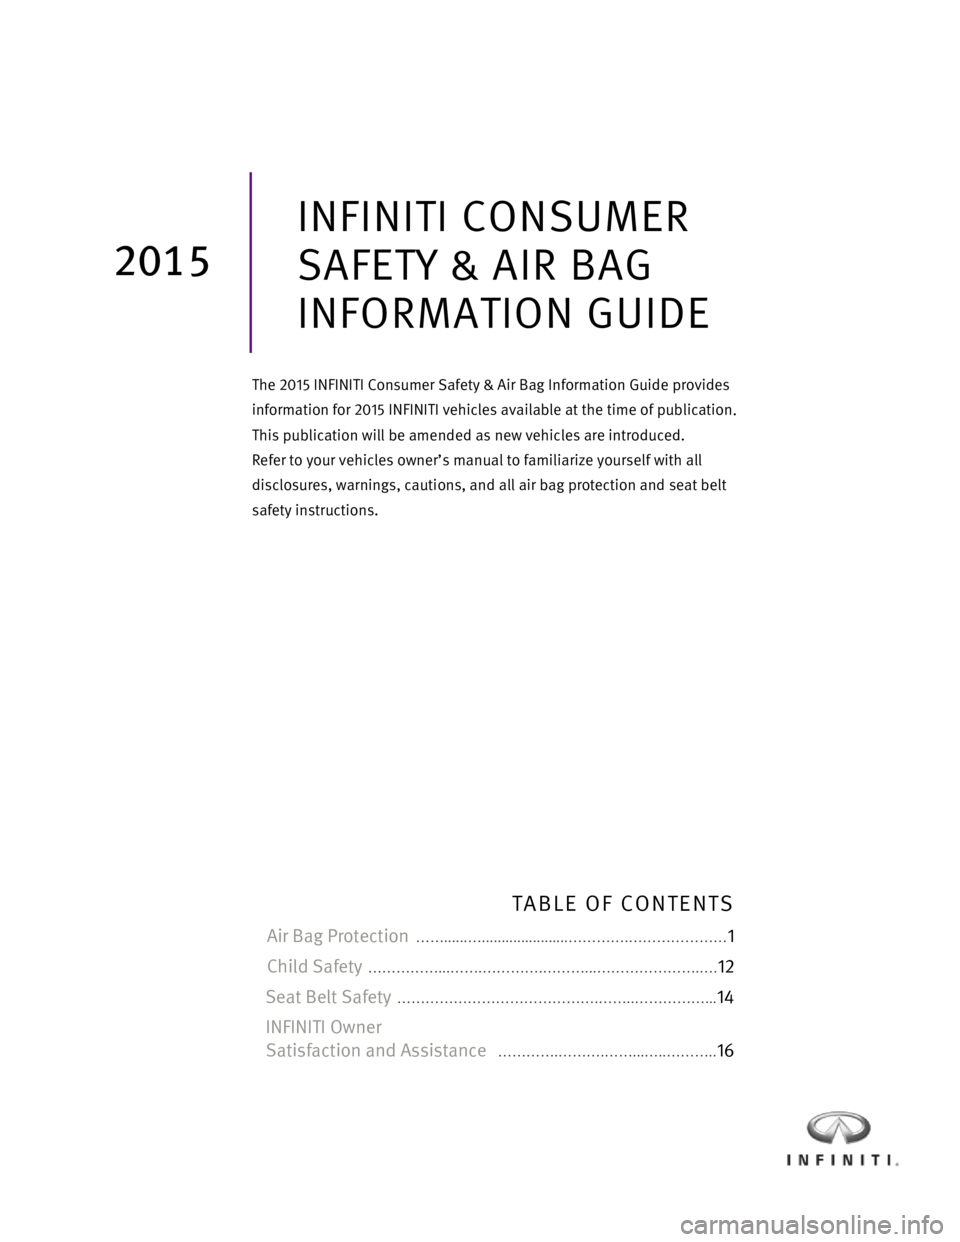 INFINITI Q70 HYBRID 2015  Consumer Safety And Air Bag Information Guide 